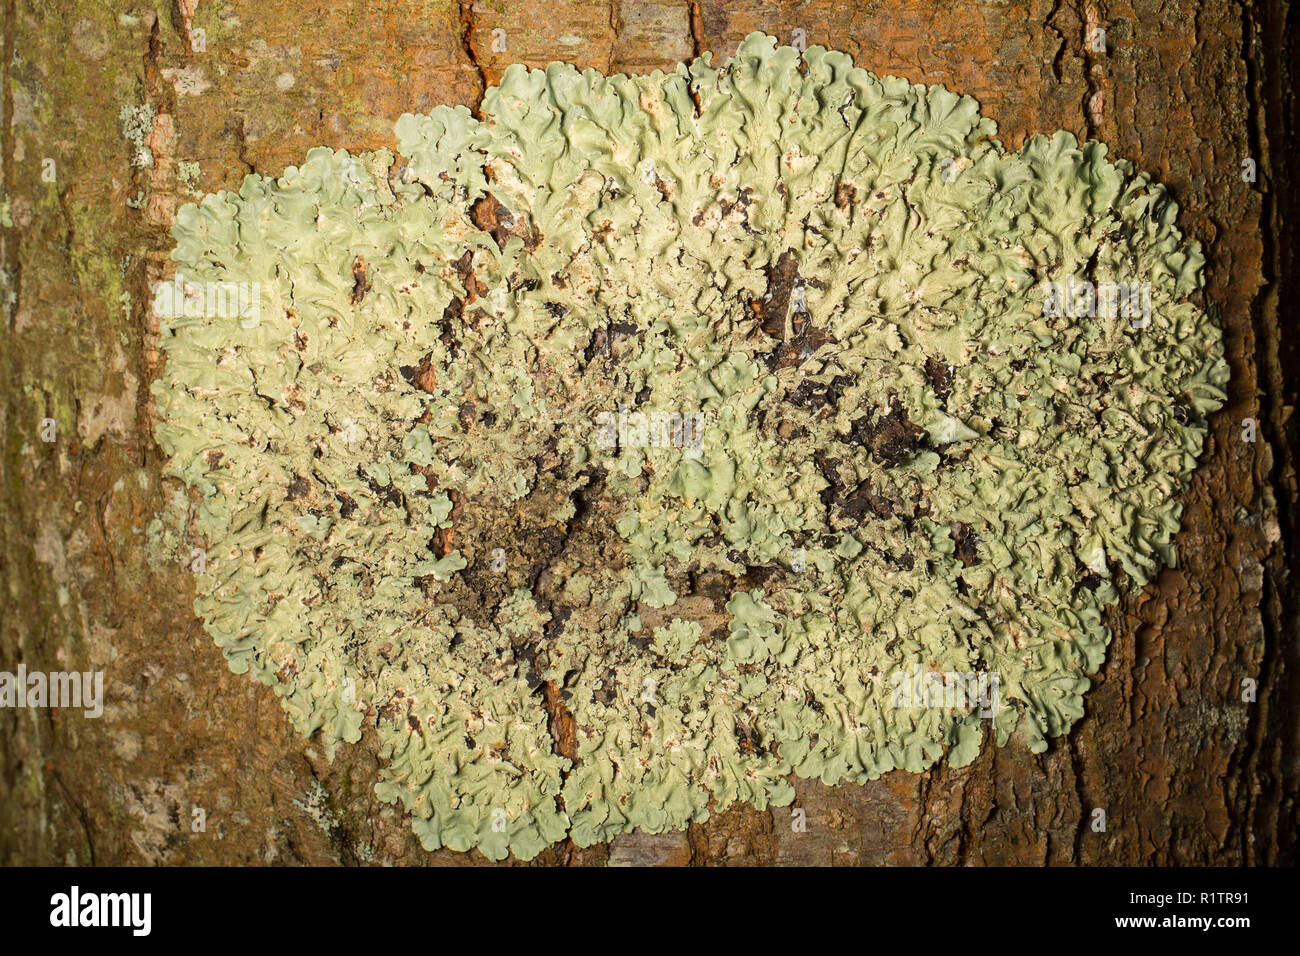 Common Greenshield lichen, Flavoparmelia caperata, growing on the trunk of a tree in rural woodlands. Dorset England UK GB Stock Photo